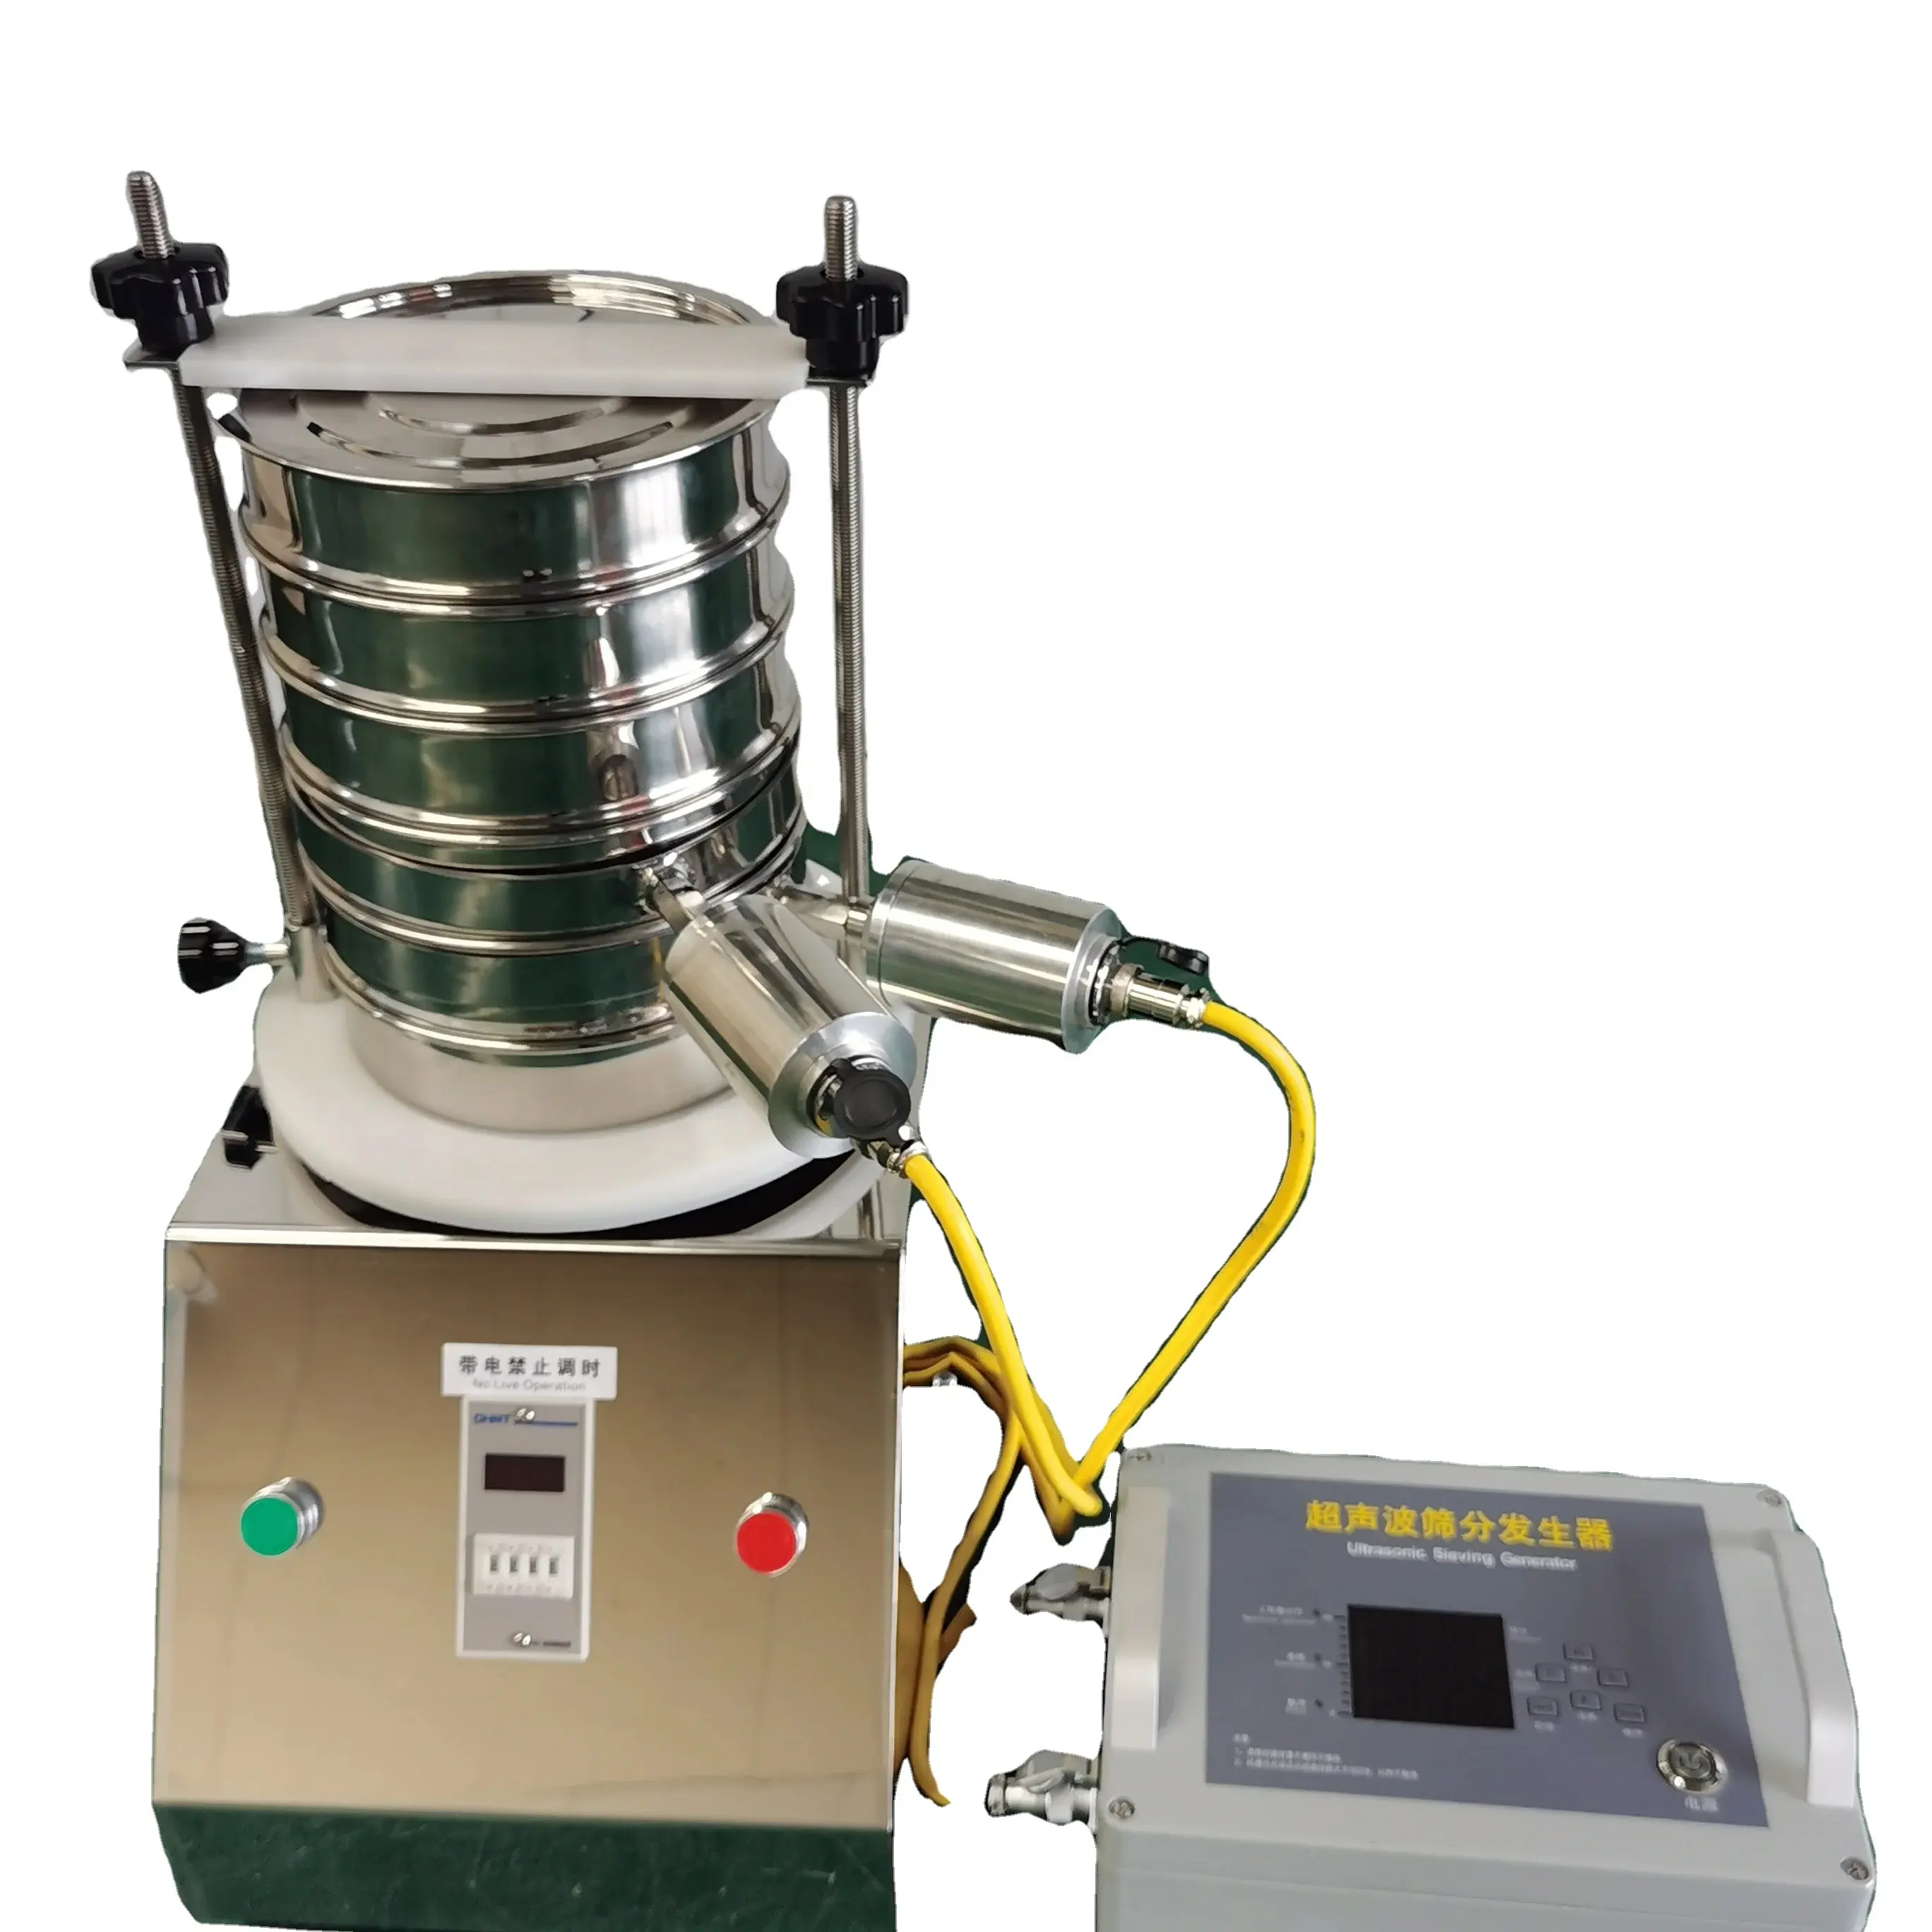 Factory Price 200mm 300mm Stainless Steel Micron Mesh Ultrasonic Test Sieve Shaker for Micro Powder